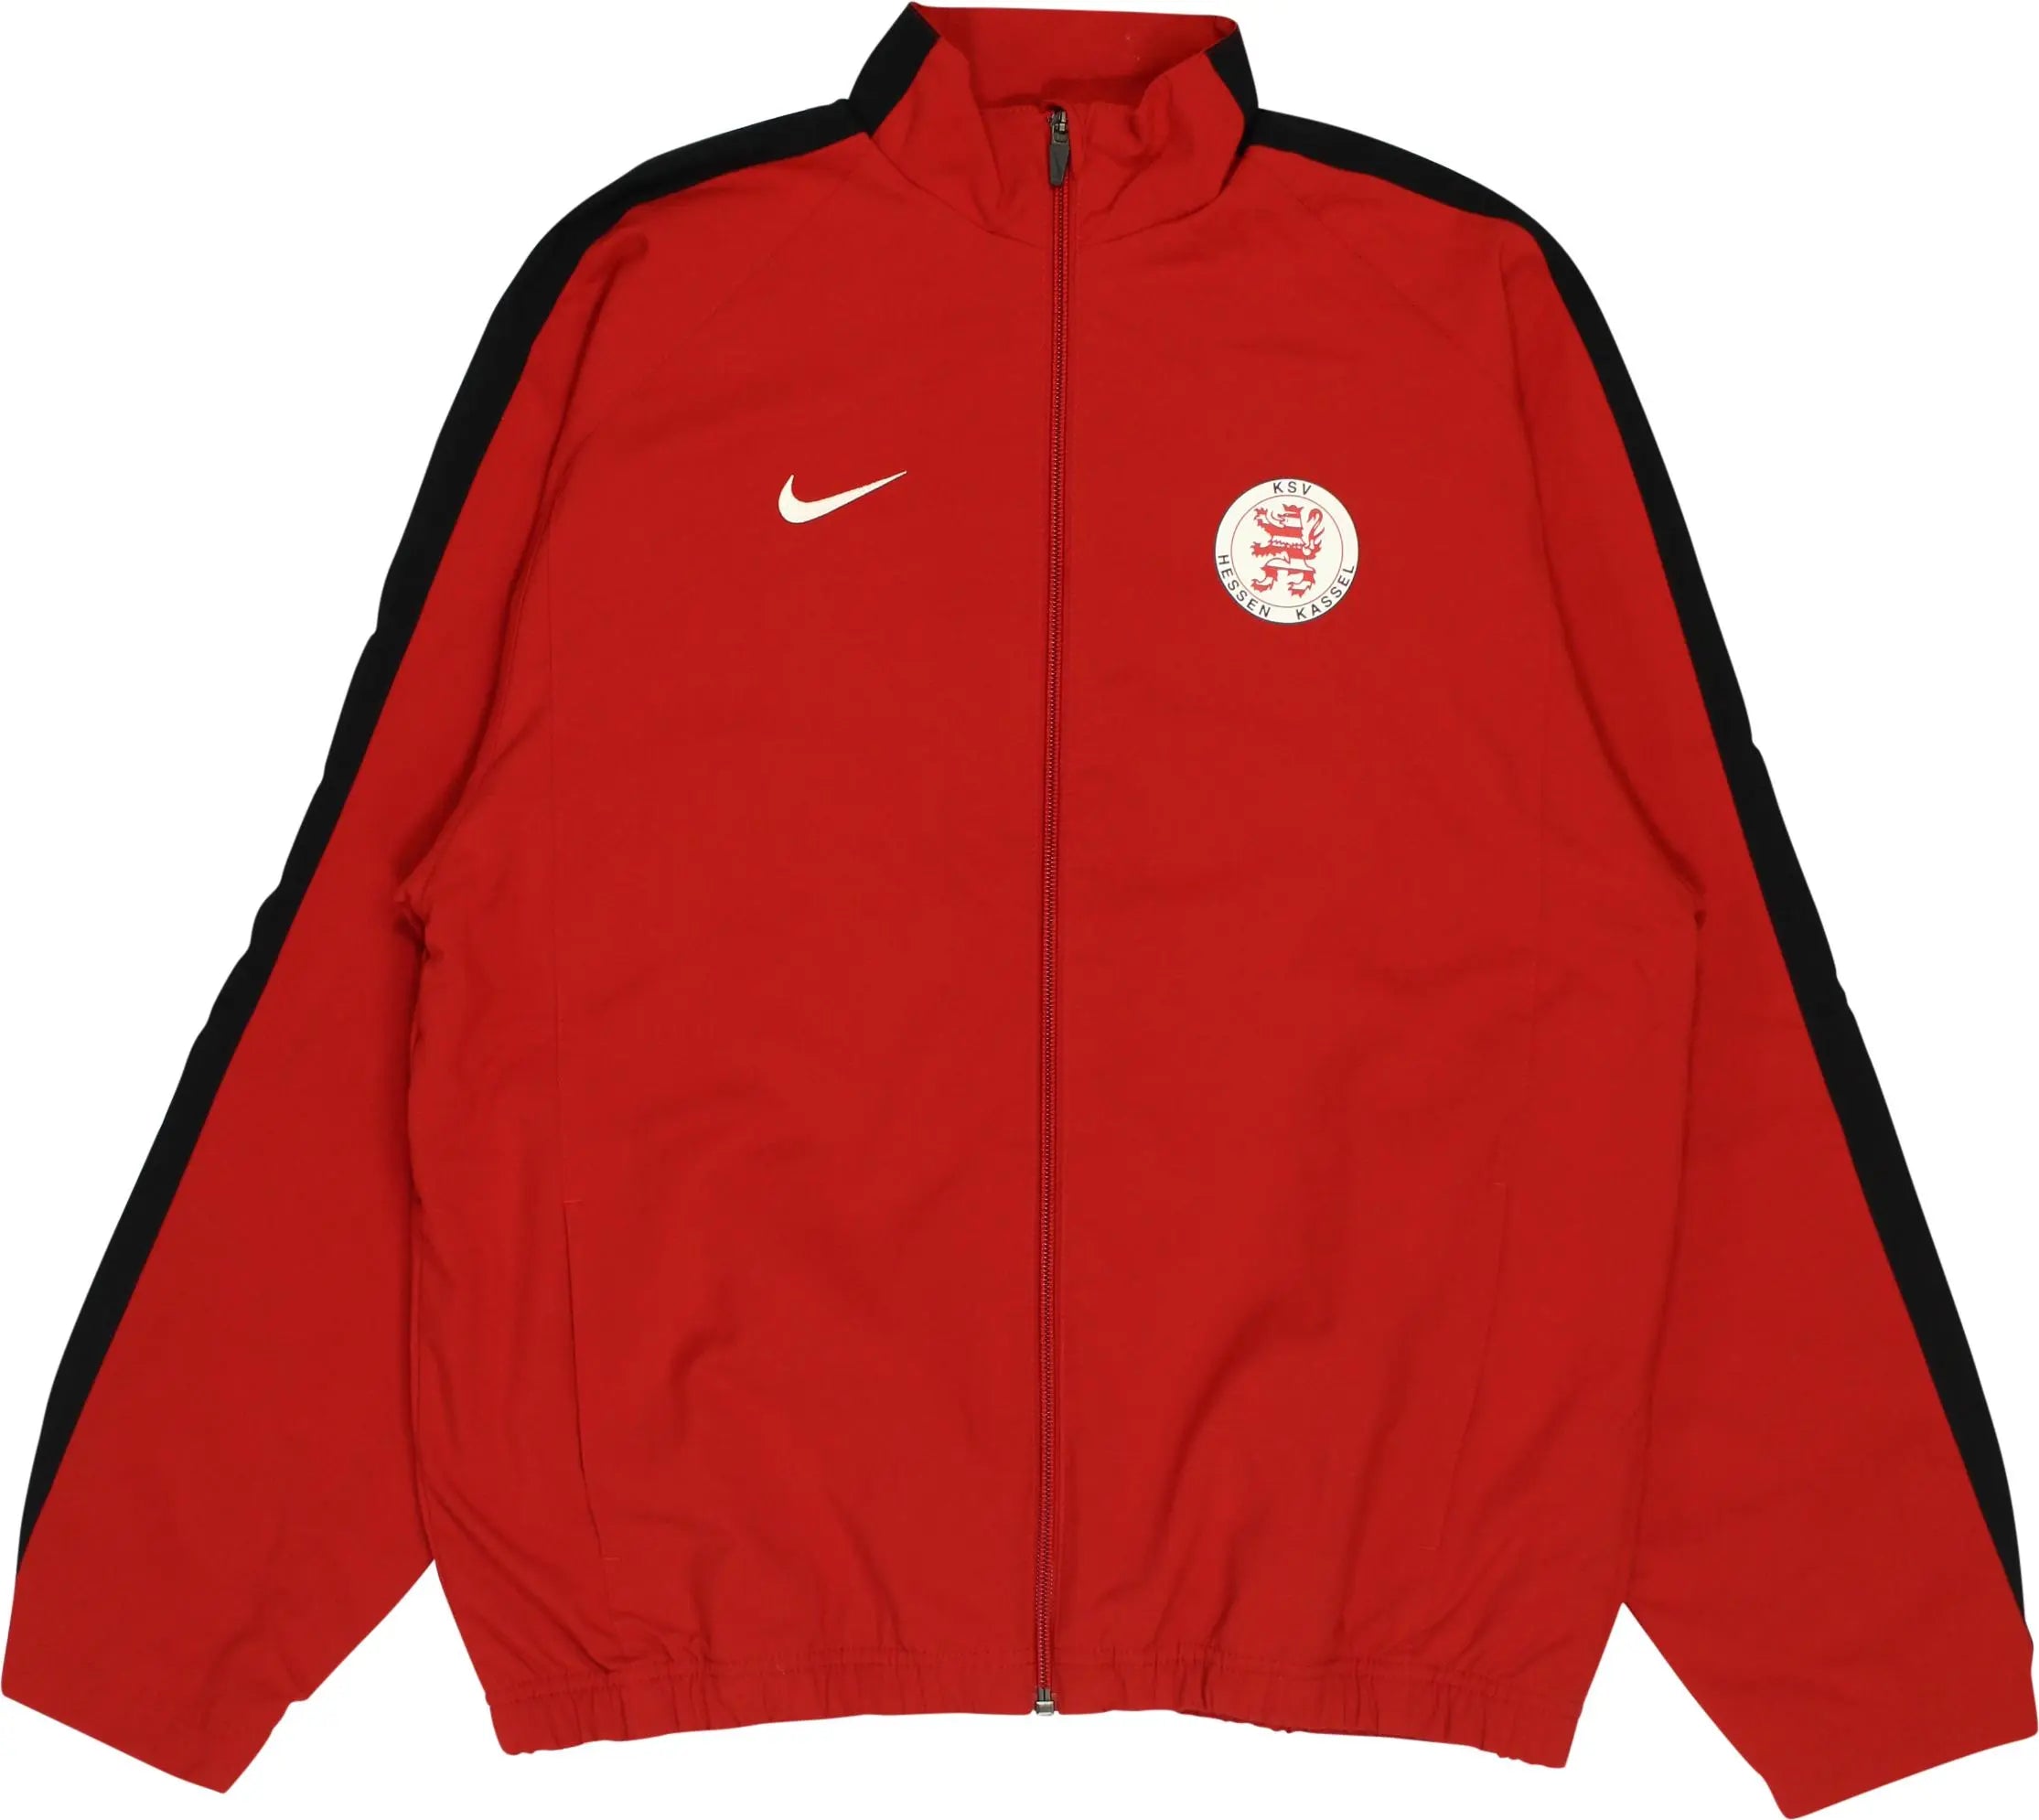 Nike - Red Track Jacket by Nike- ThriftTale.com - Vintage and second handclothing